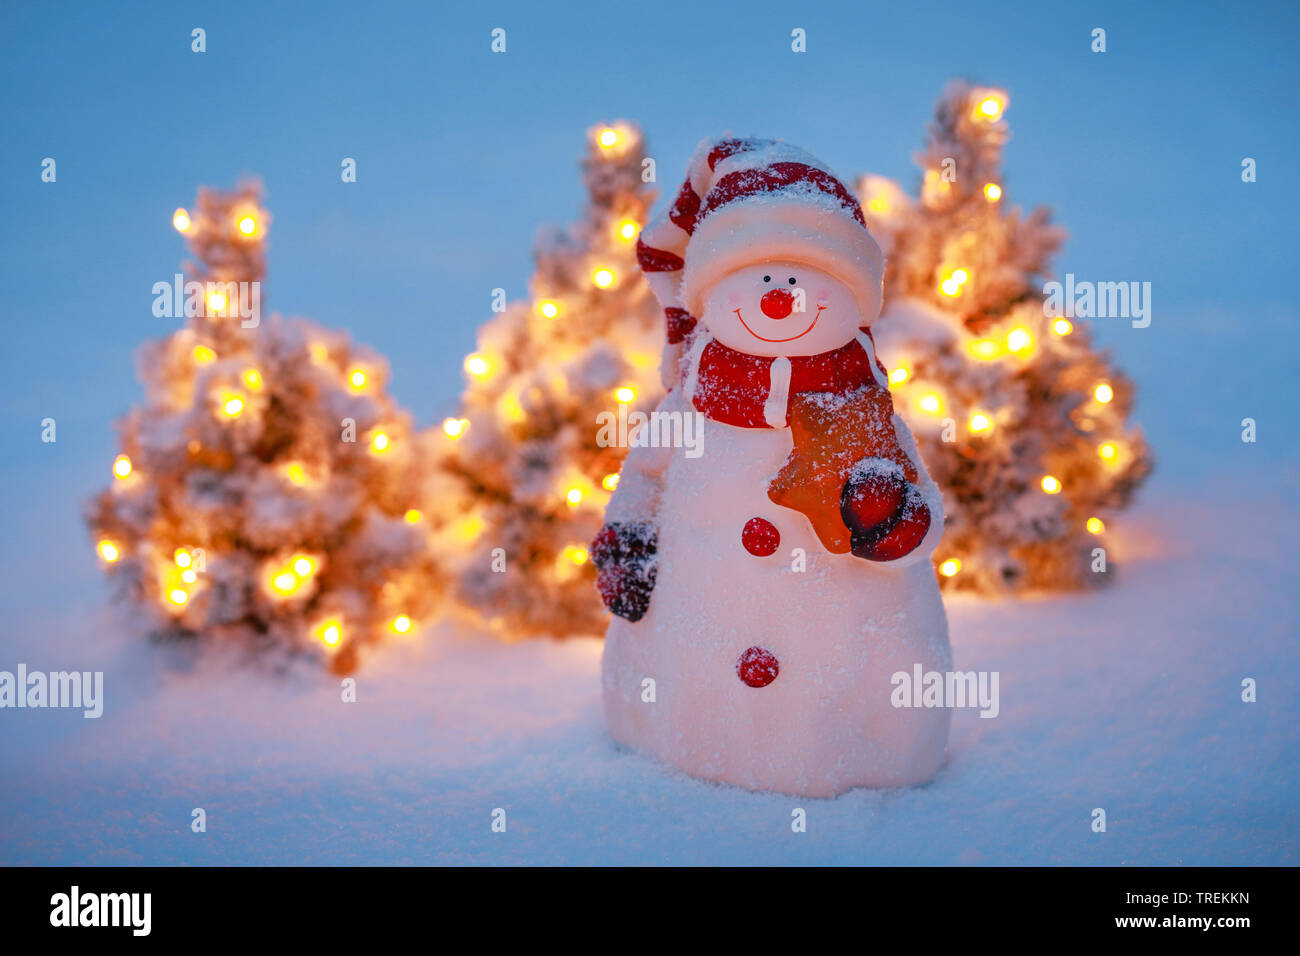 snowman and small illuminated Christmas trees in snow Stock Photo